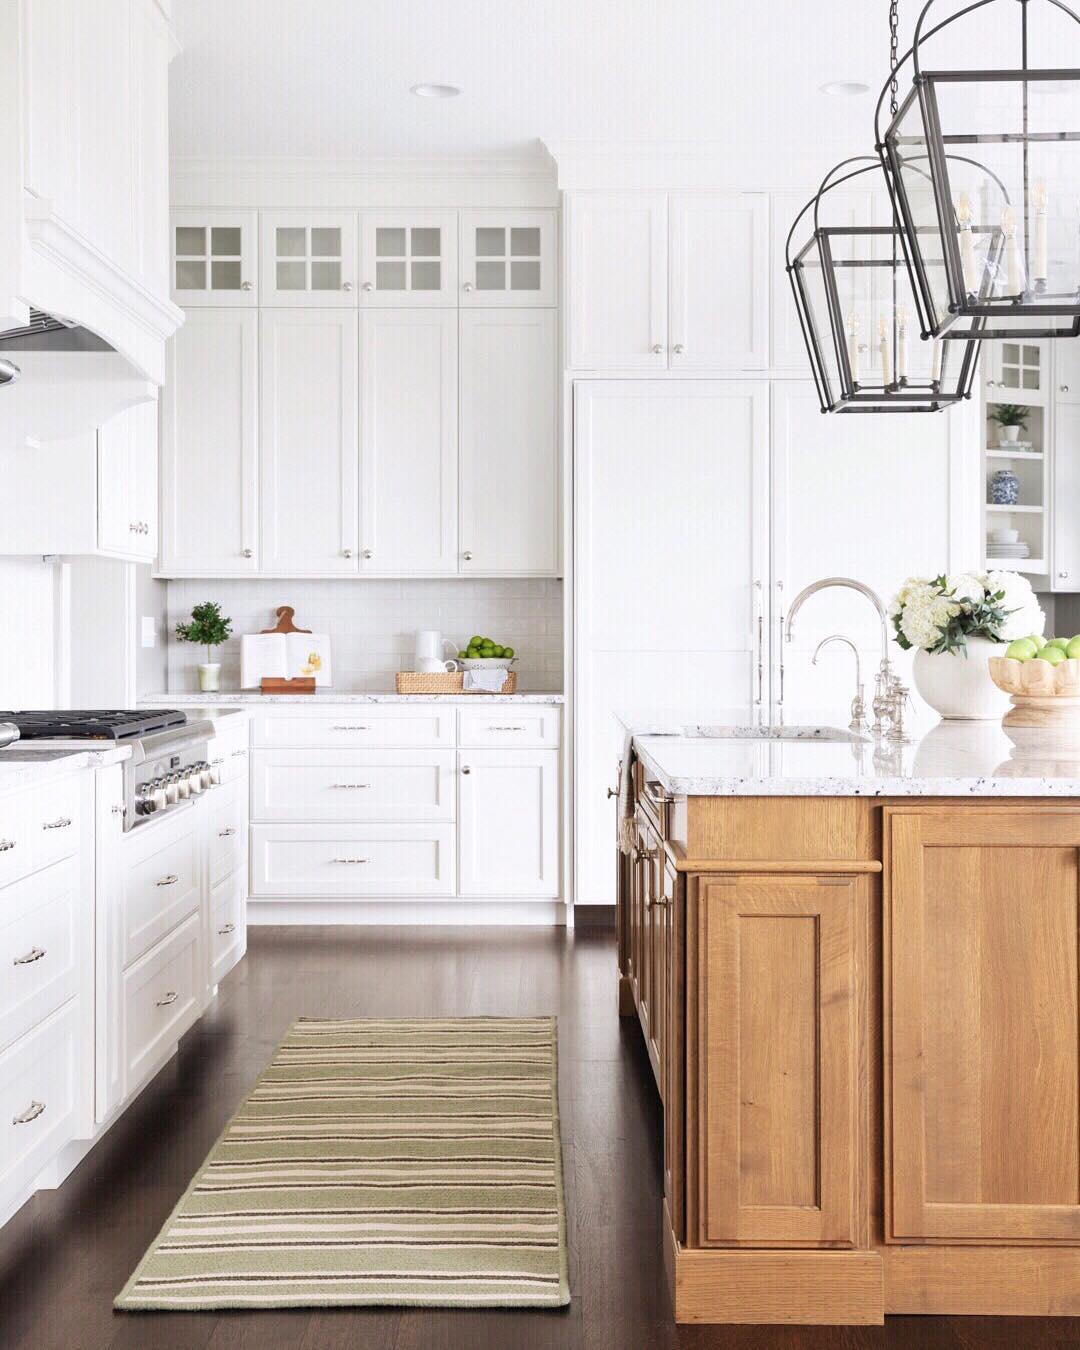 Large modern kitchen. Photo by Instagram user @thehouseofbrookeandlou